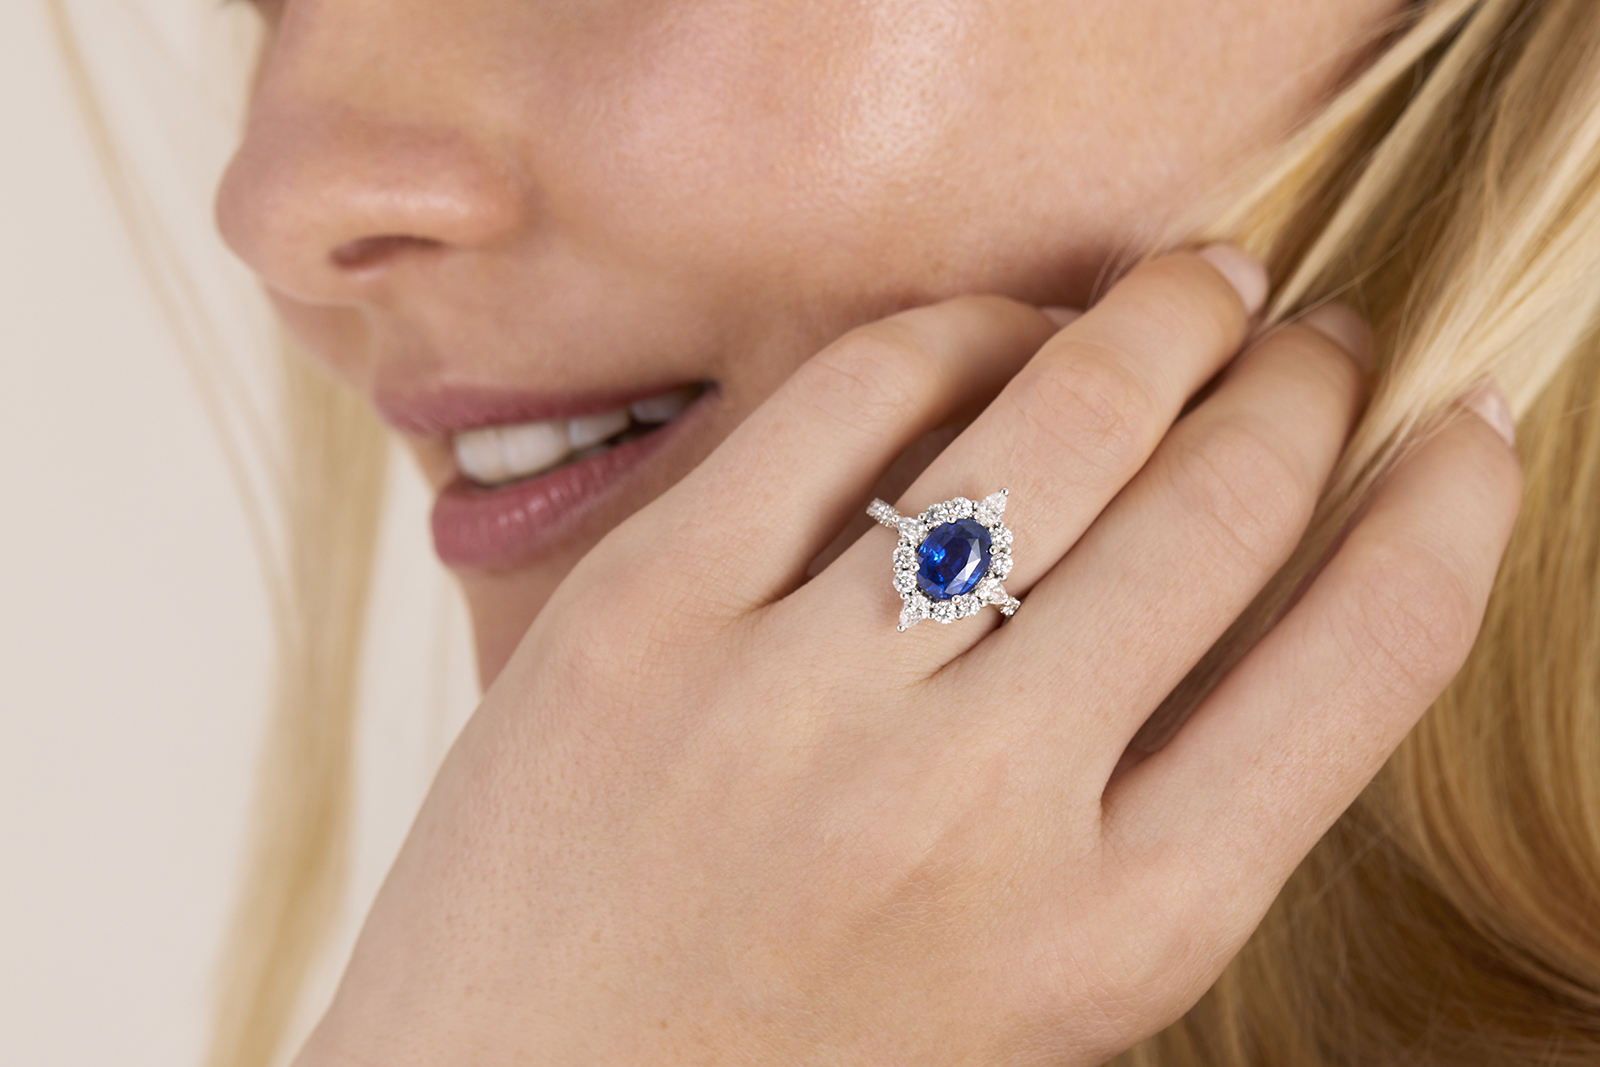 Taylor & Hart oval blue sapphire engagement ring with a round and pear-shaped diamond halo and pavé diamond band